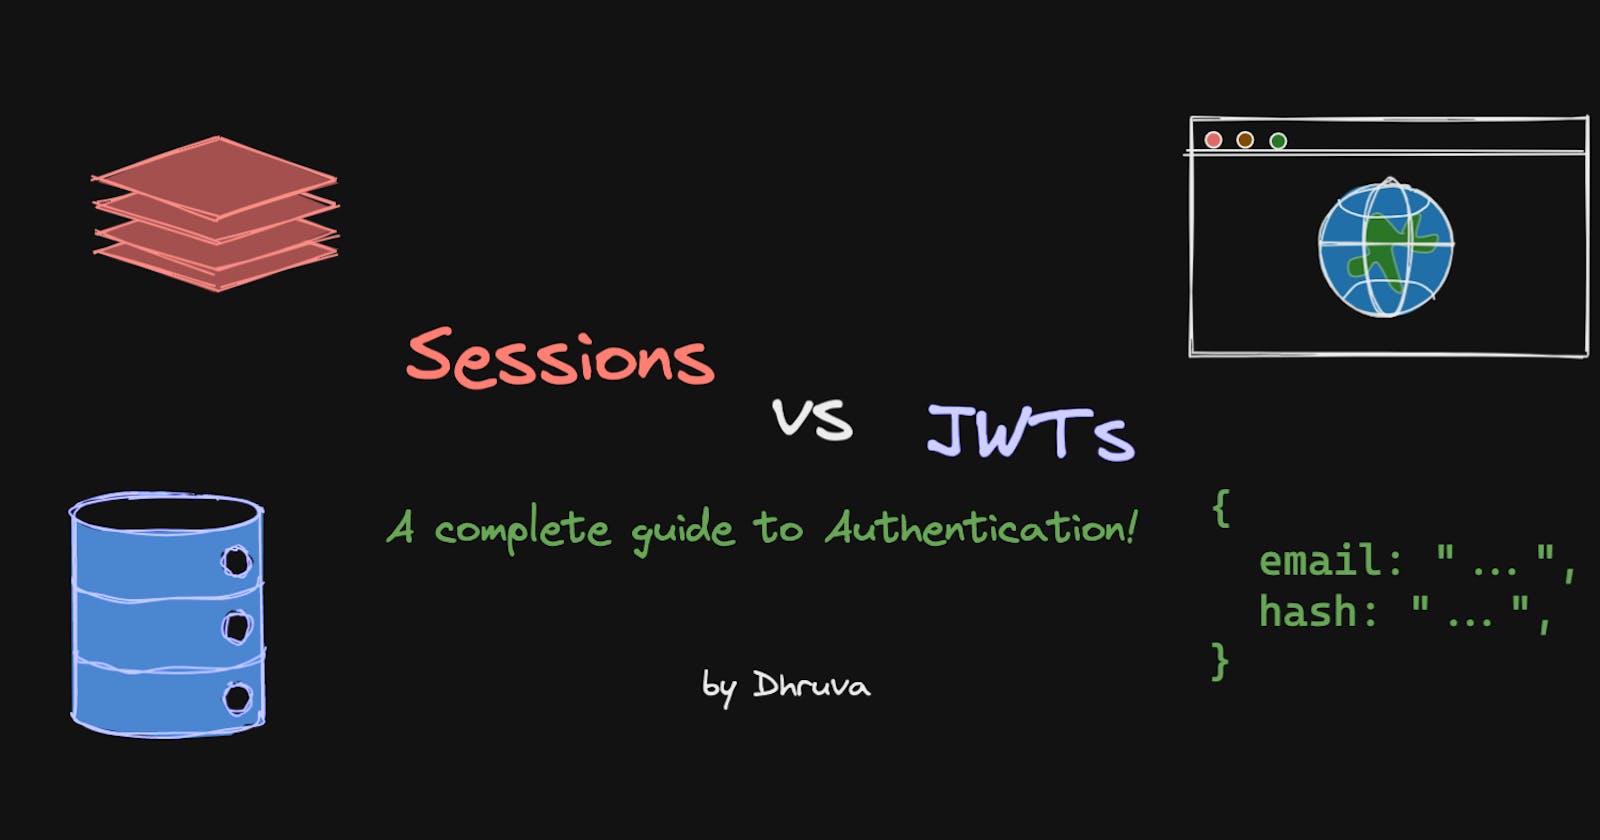 Sessions vs JWTs - A Complete Guide to Authentication